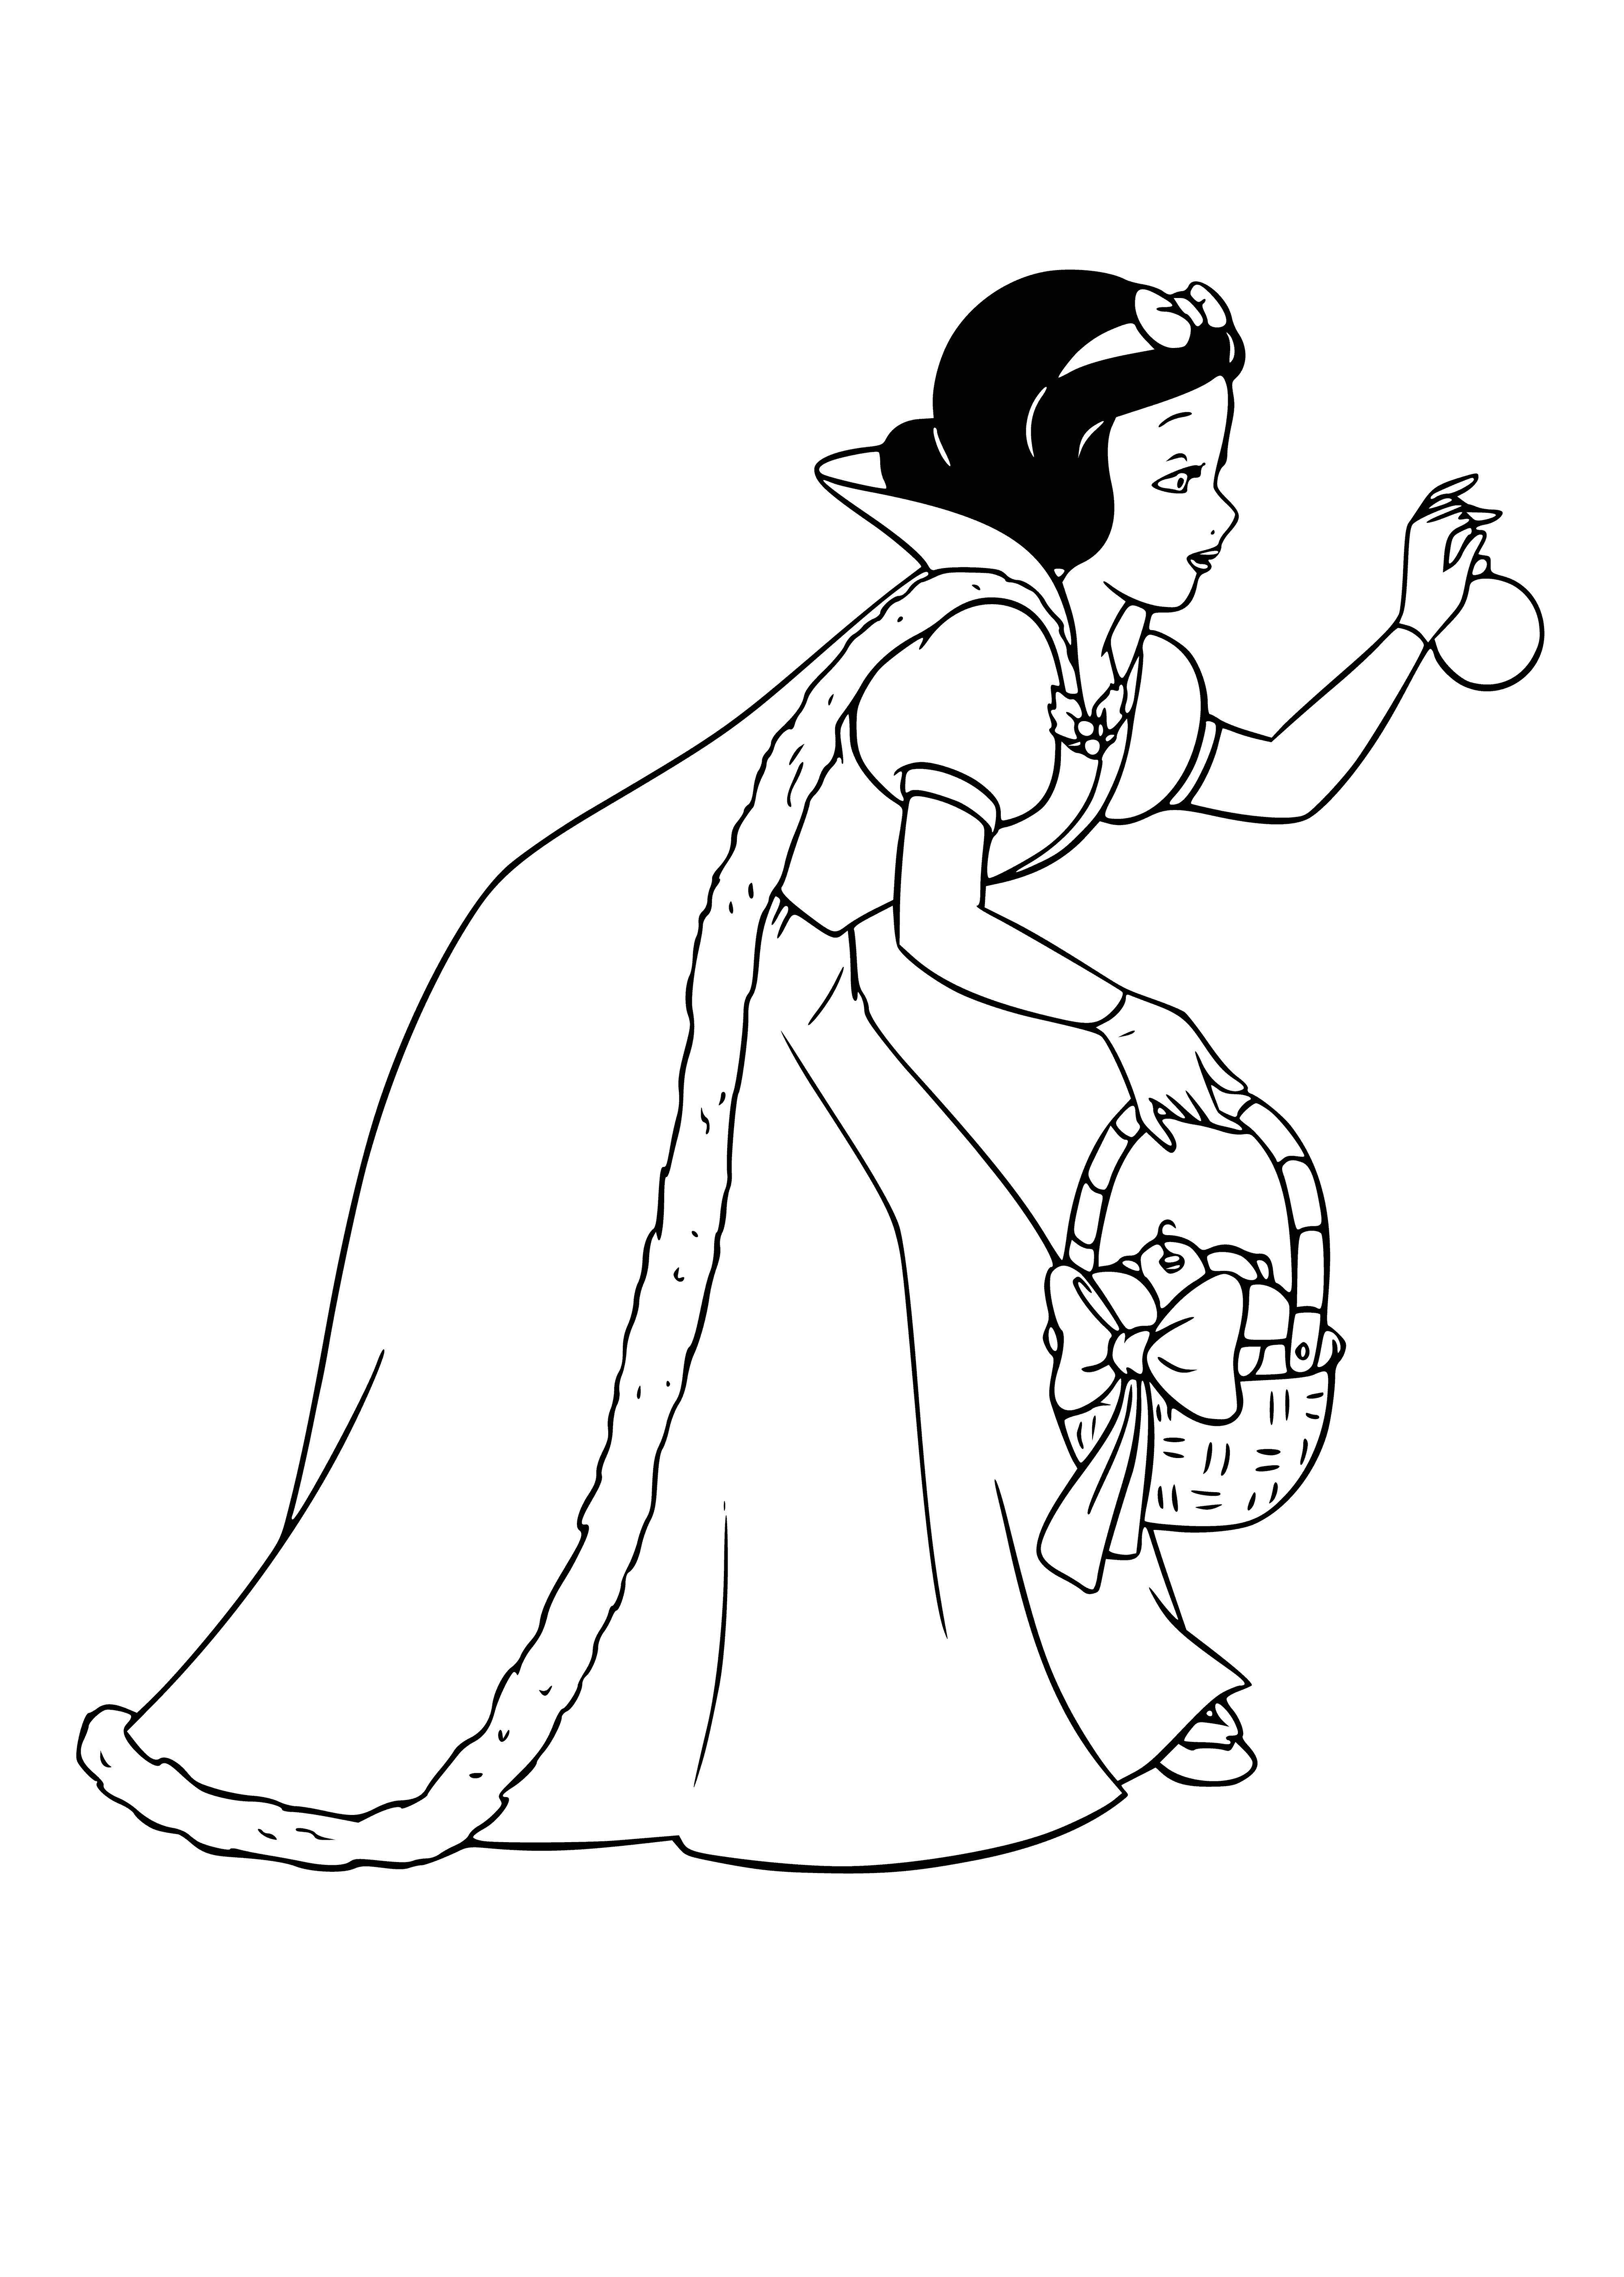 Snow White hangs up the Christmas ball coloring page